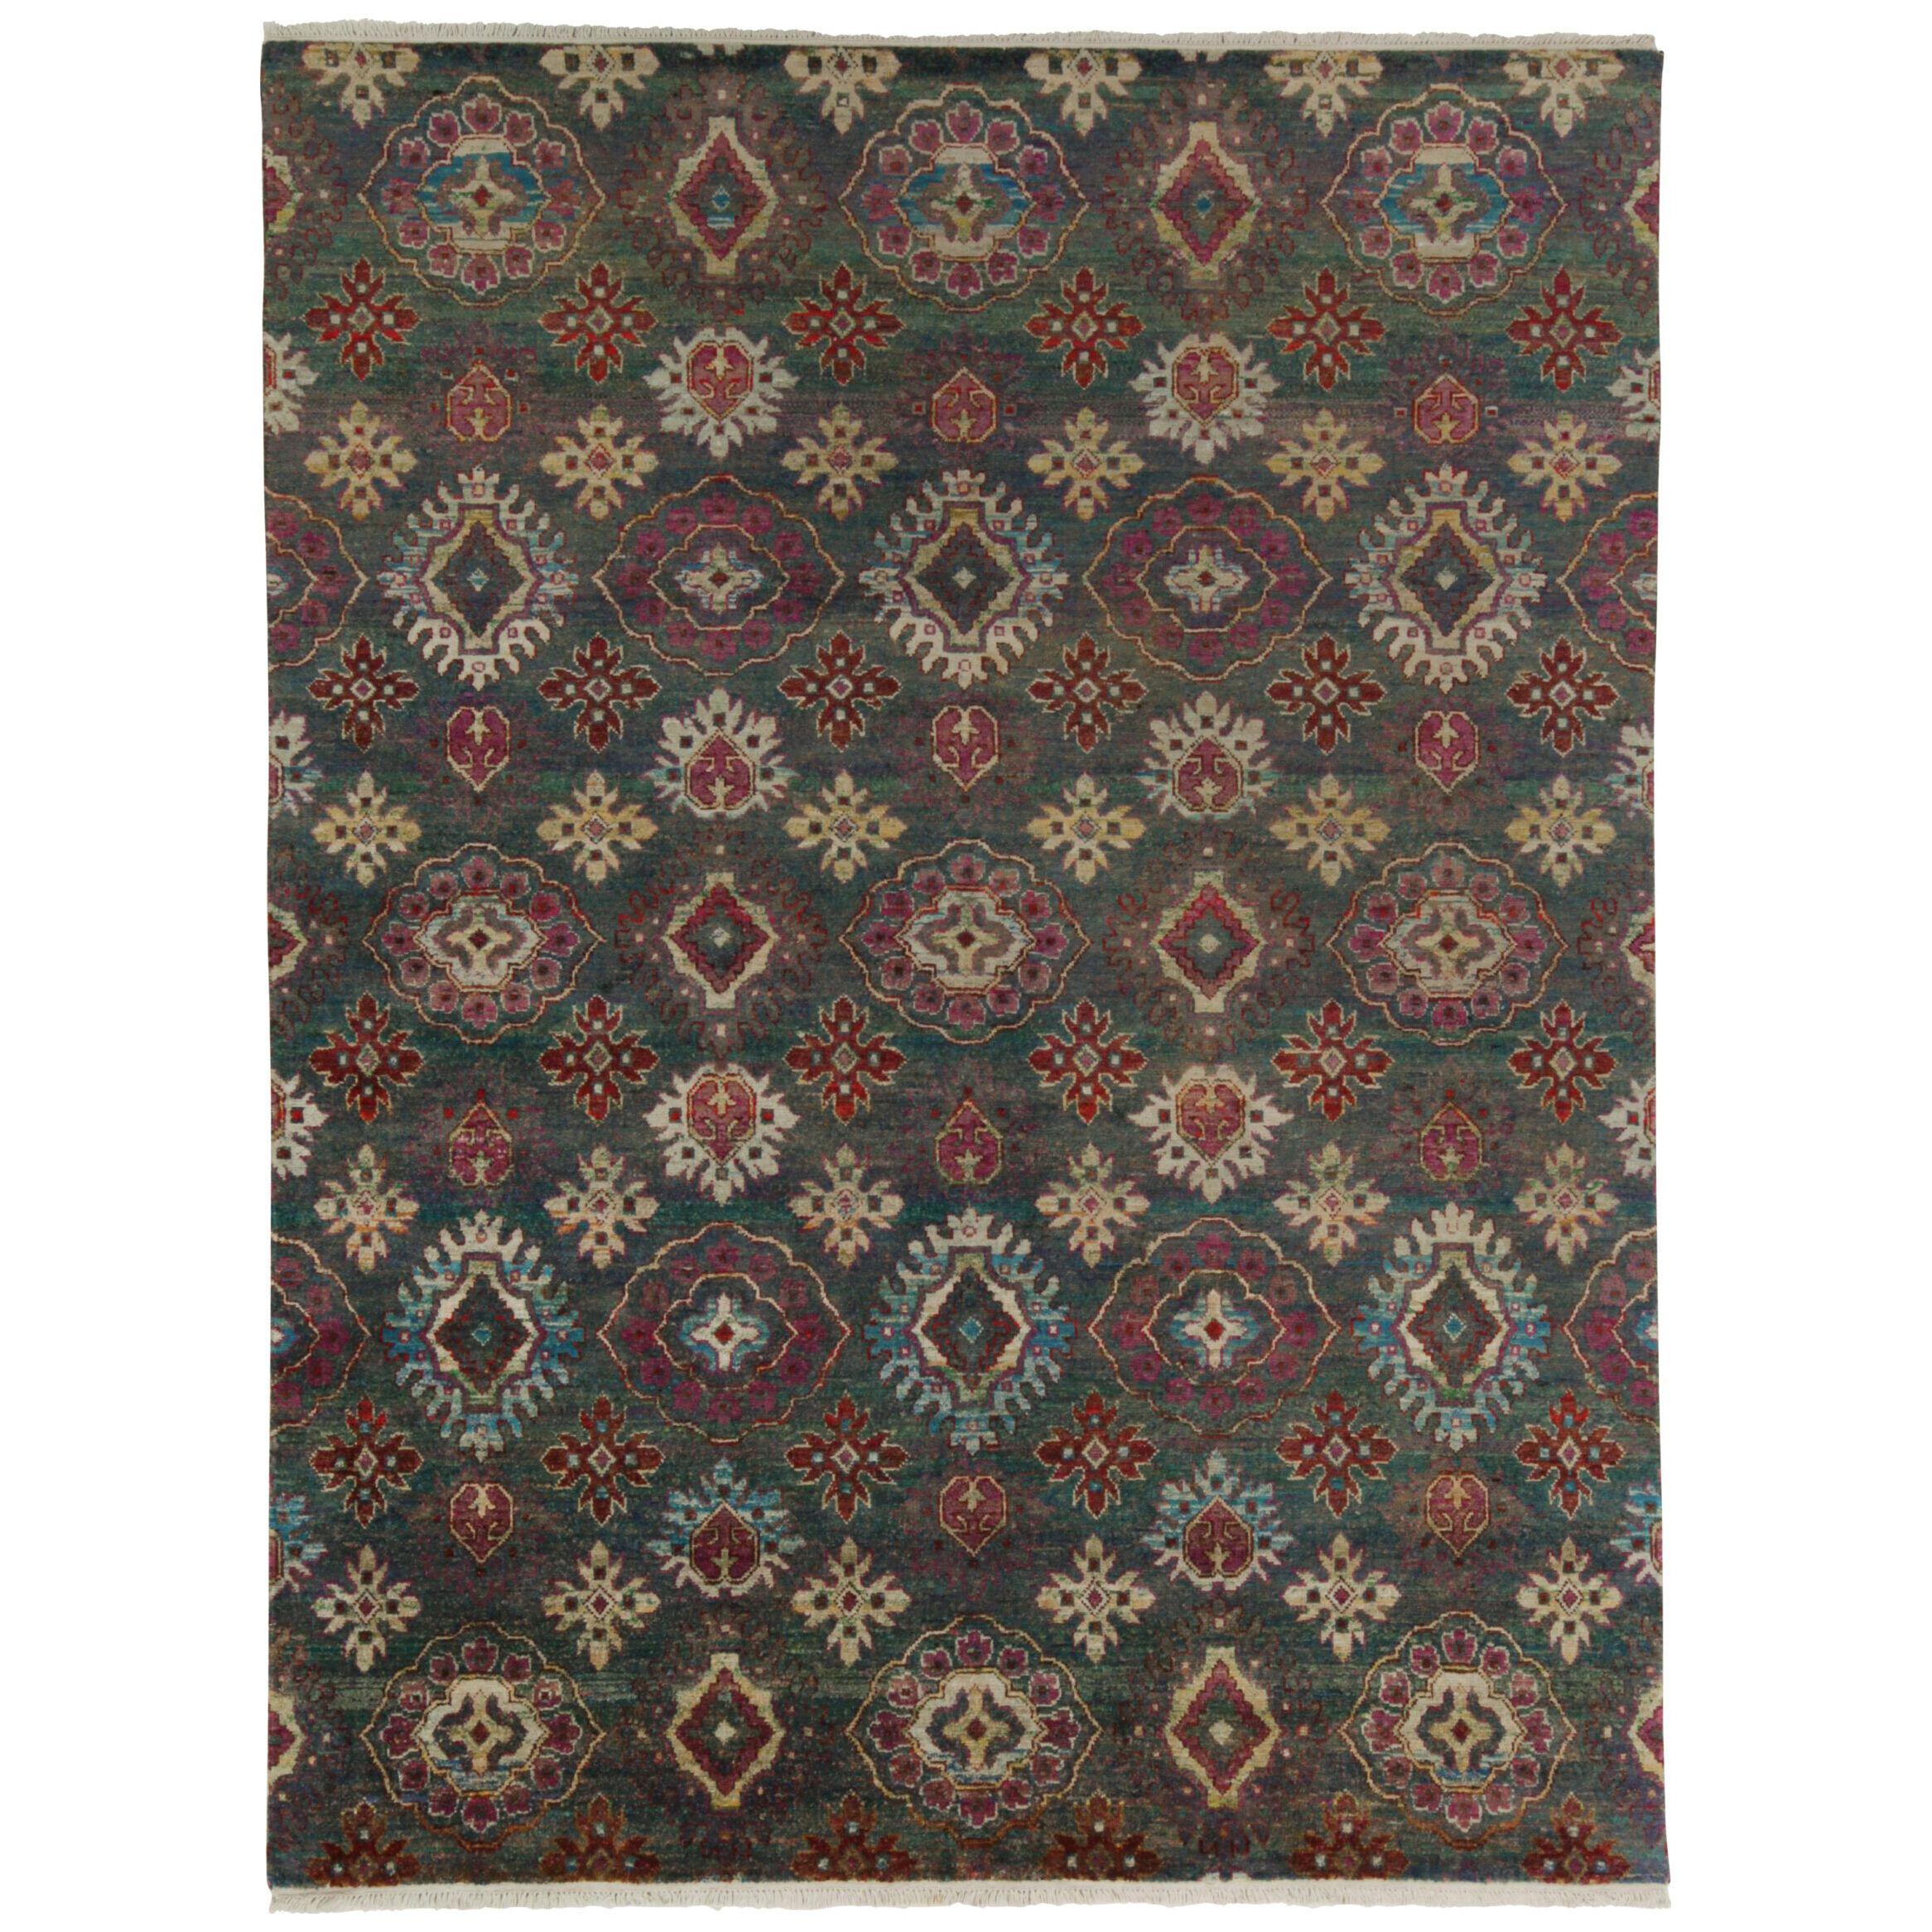 Rug & Kilim’s Classic Style Rug in Green With Beige and Red Ikats Medallions